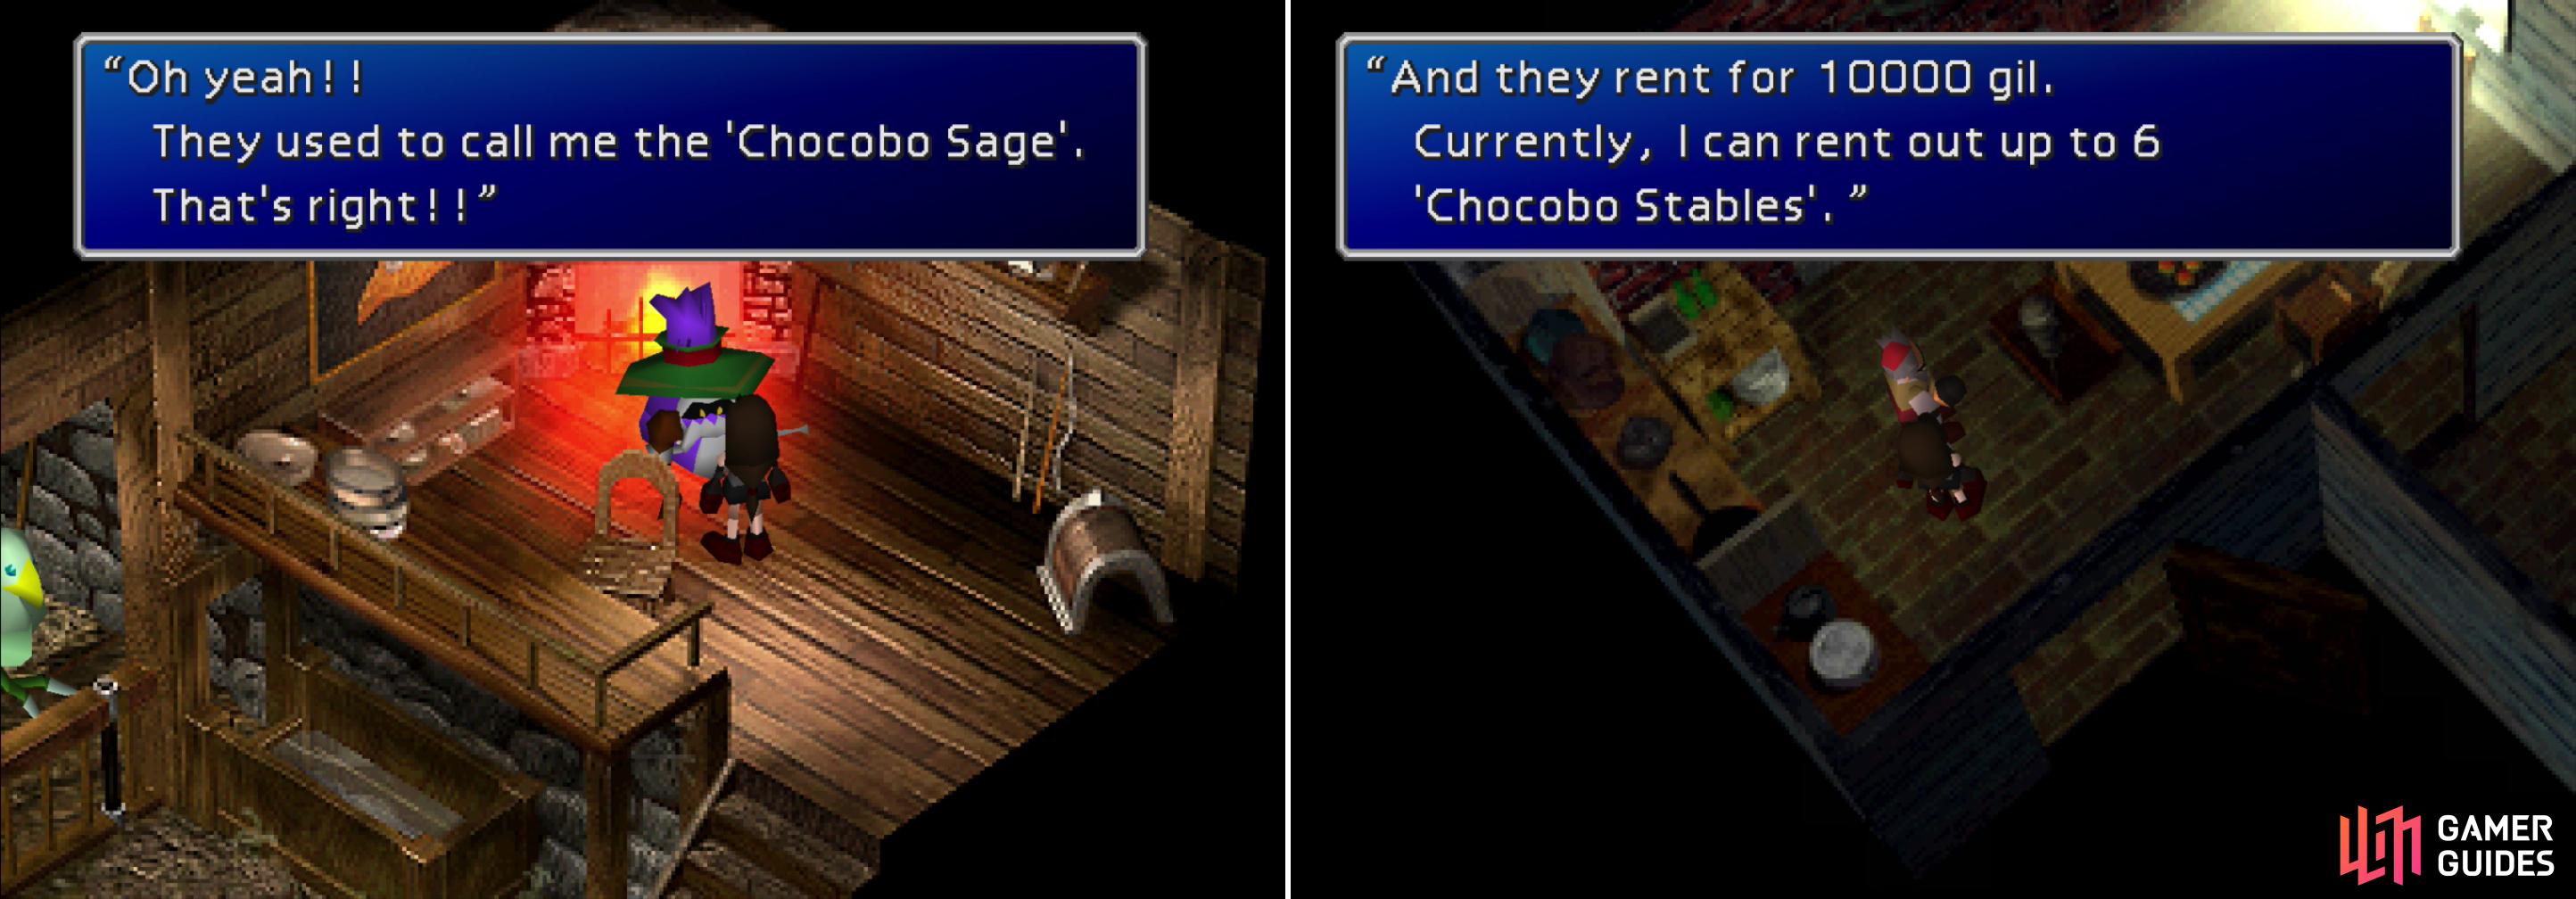 Talk to the Chocobo Sage to learn about breeding epic birds, and to buy high-quality Greens (left). Make sure to buy some stables to house your captured Chocobos! (right)